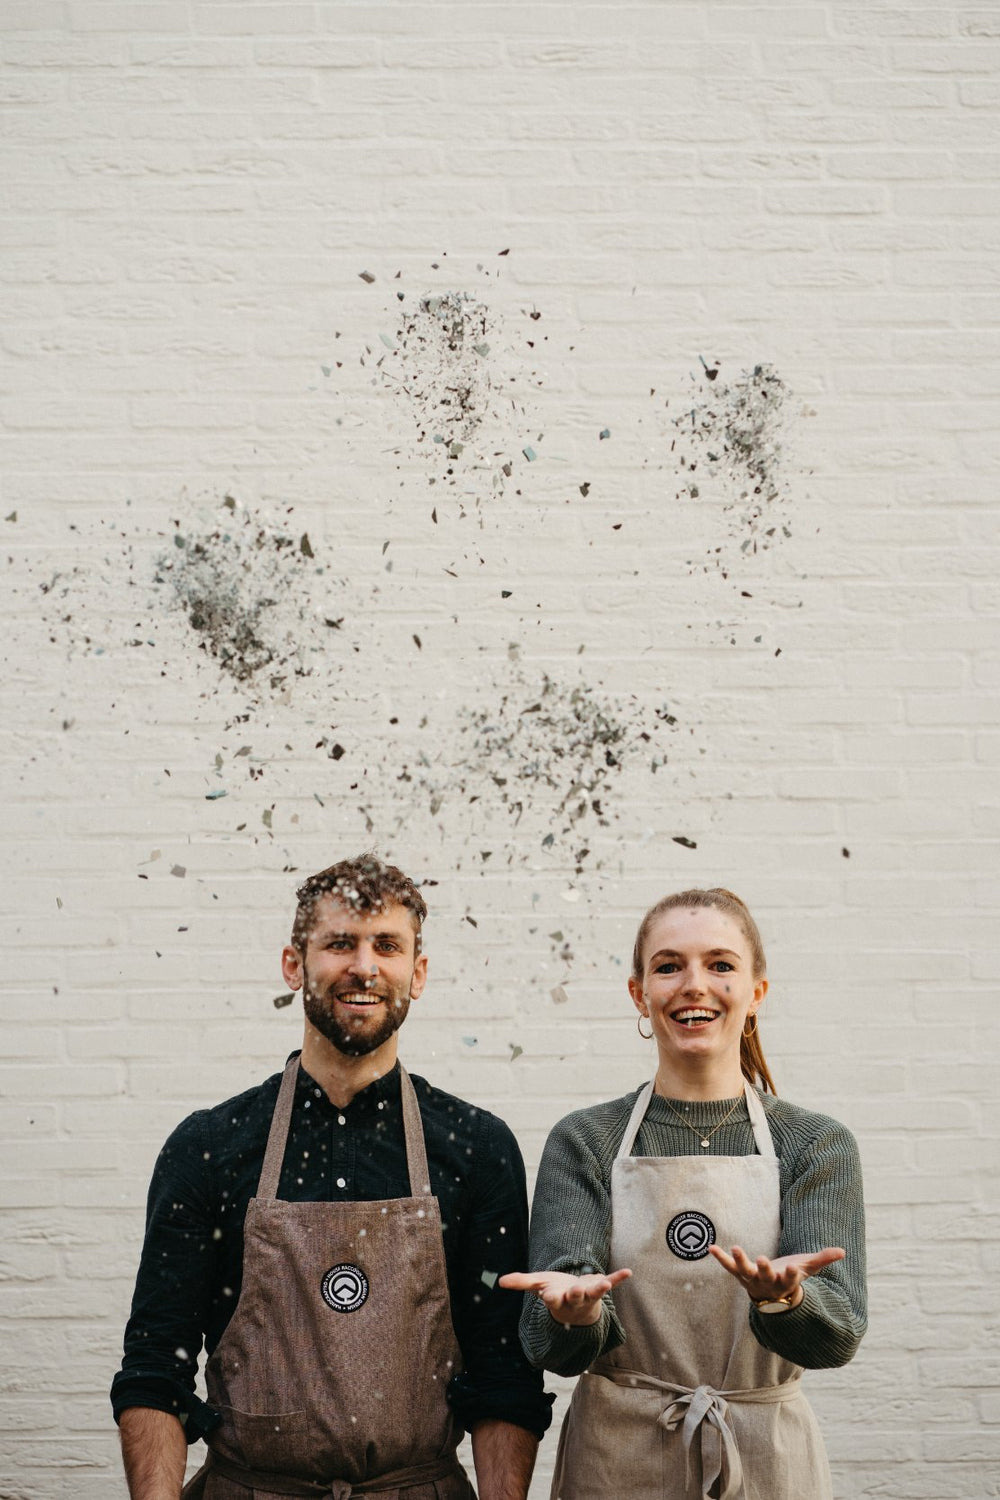 Atelier House Raccoon, Antwerp, founders Nathan and Anneleen